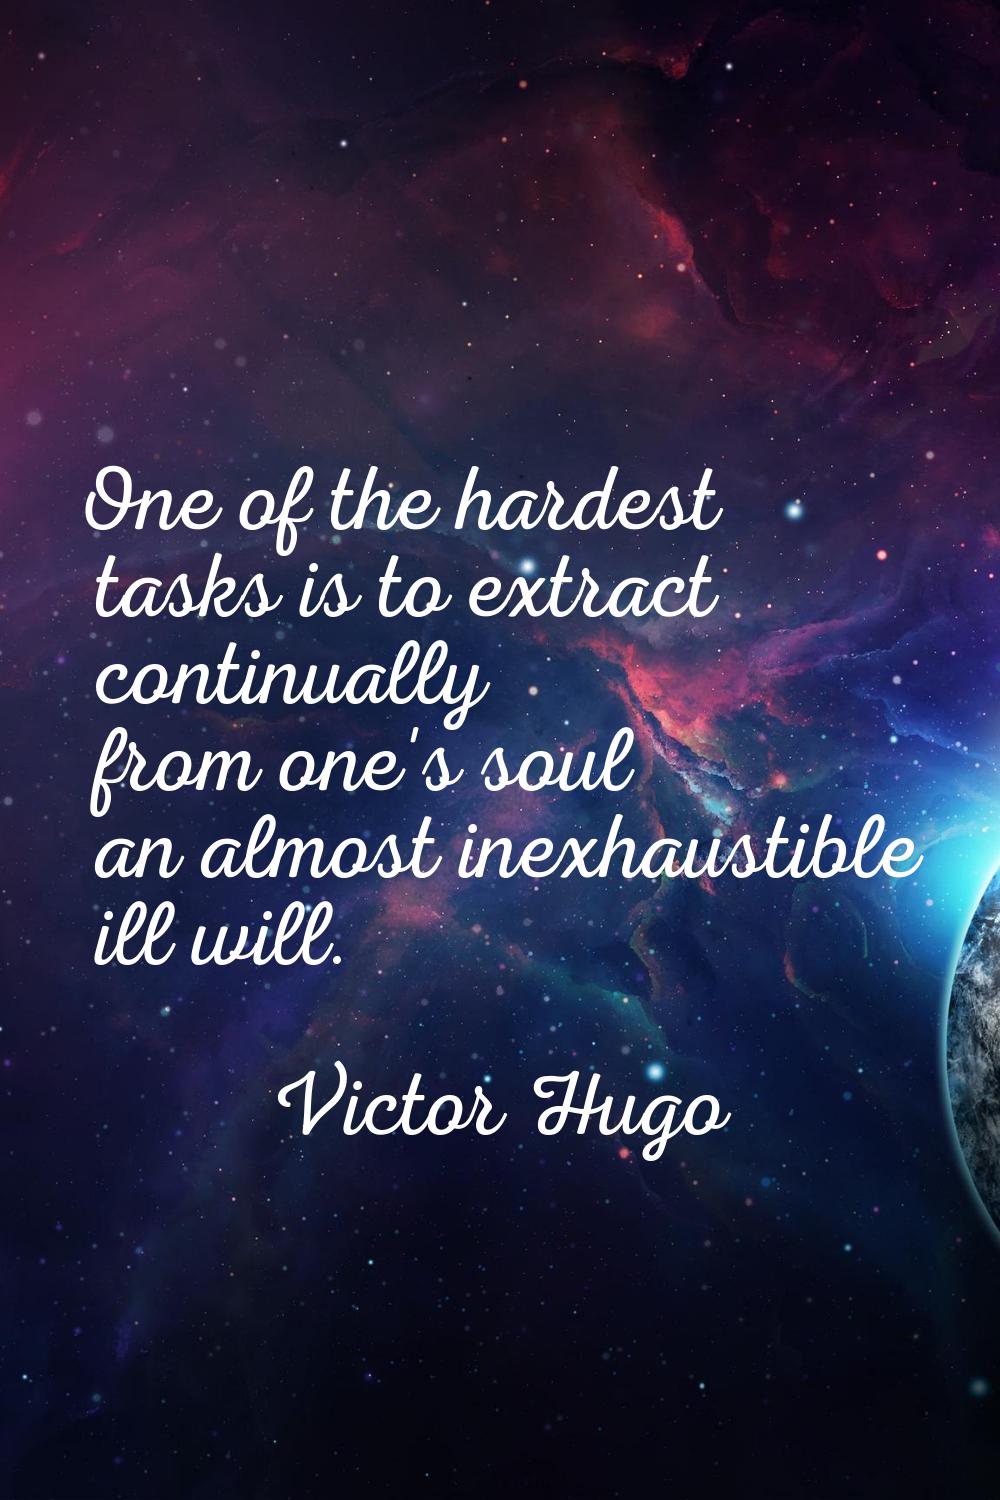 One of the hardest tasks is to extract continually from one's soul an almost inexhaustible ill will